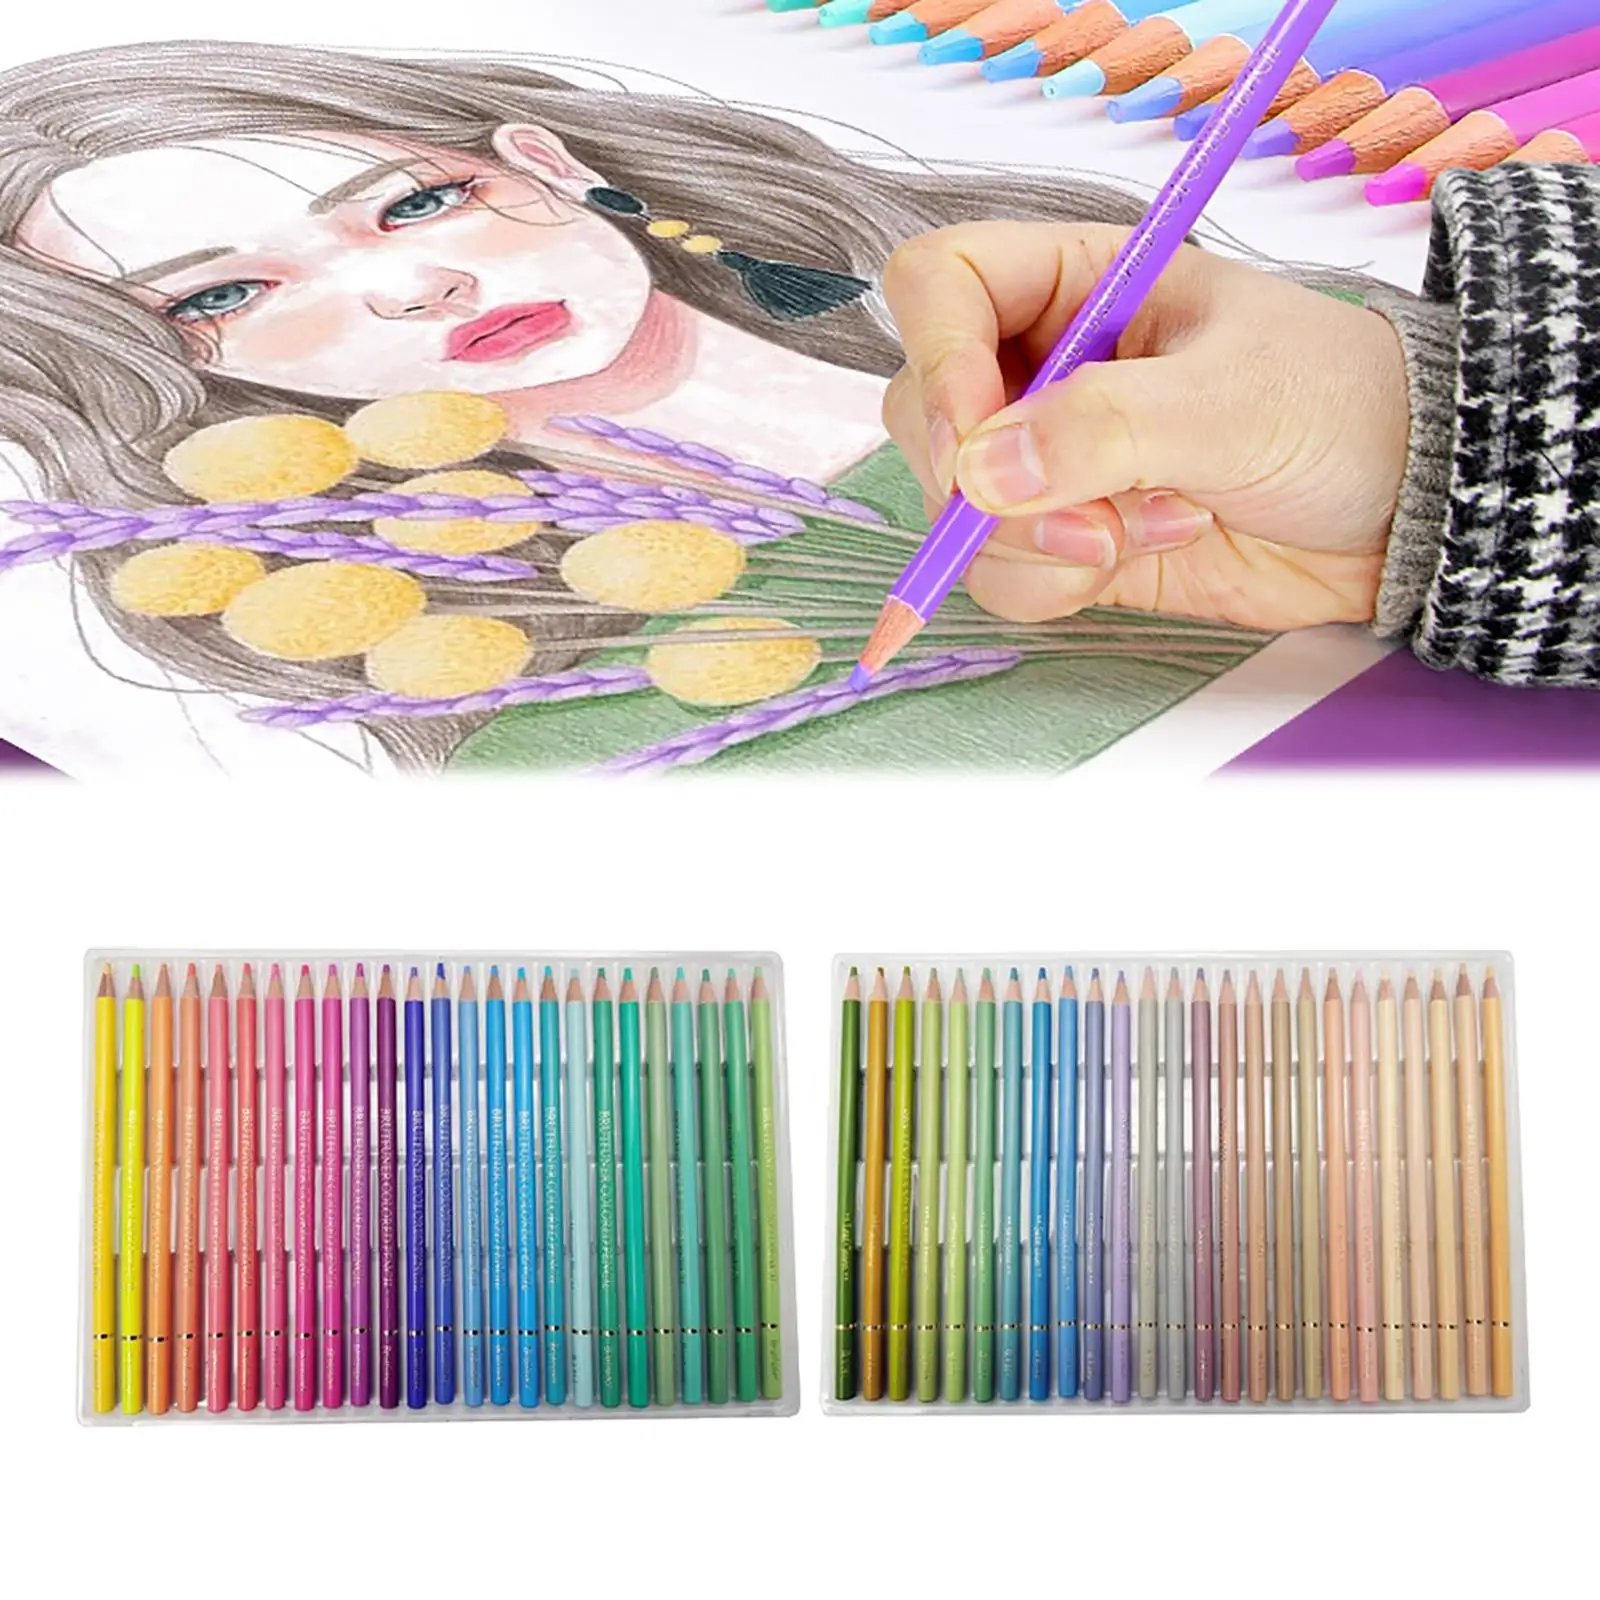 50 Colors Oil Colored Pencils Carry Anywhere Wood Art Supplies for Children Professionals School Art Coloring Blending Crafting